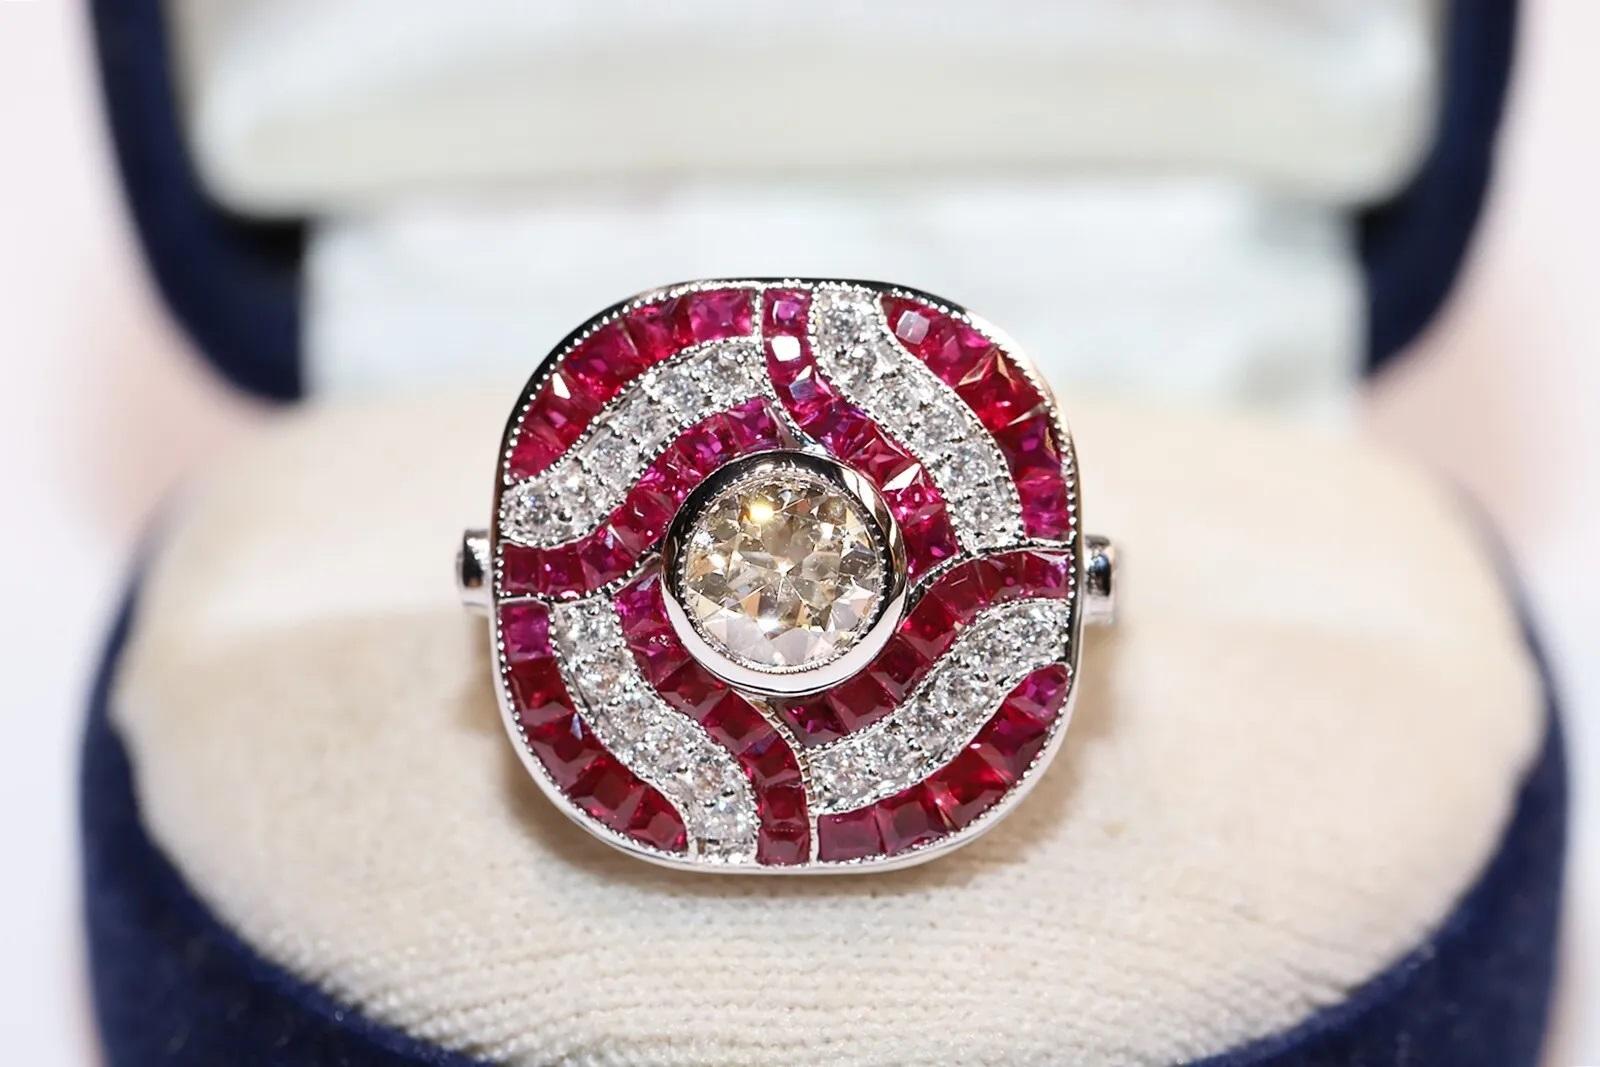 In very good condition.
Total weight is 7.3 grams.
Totally is center diamond 0.72 carat.
Totally is all diamond 1.22 carat.
The diamond is has  H-I-J color and vvs-S1 clarity.
Totally is ruby totally 0.55 carat.
Ring size is US 6.5 (We offer free